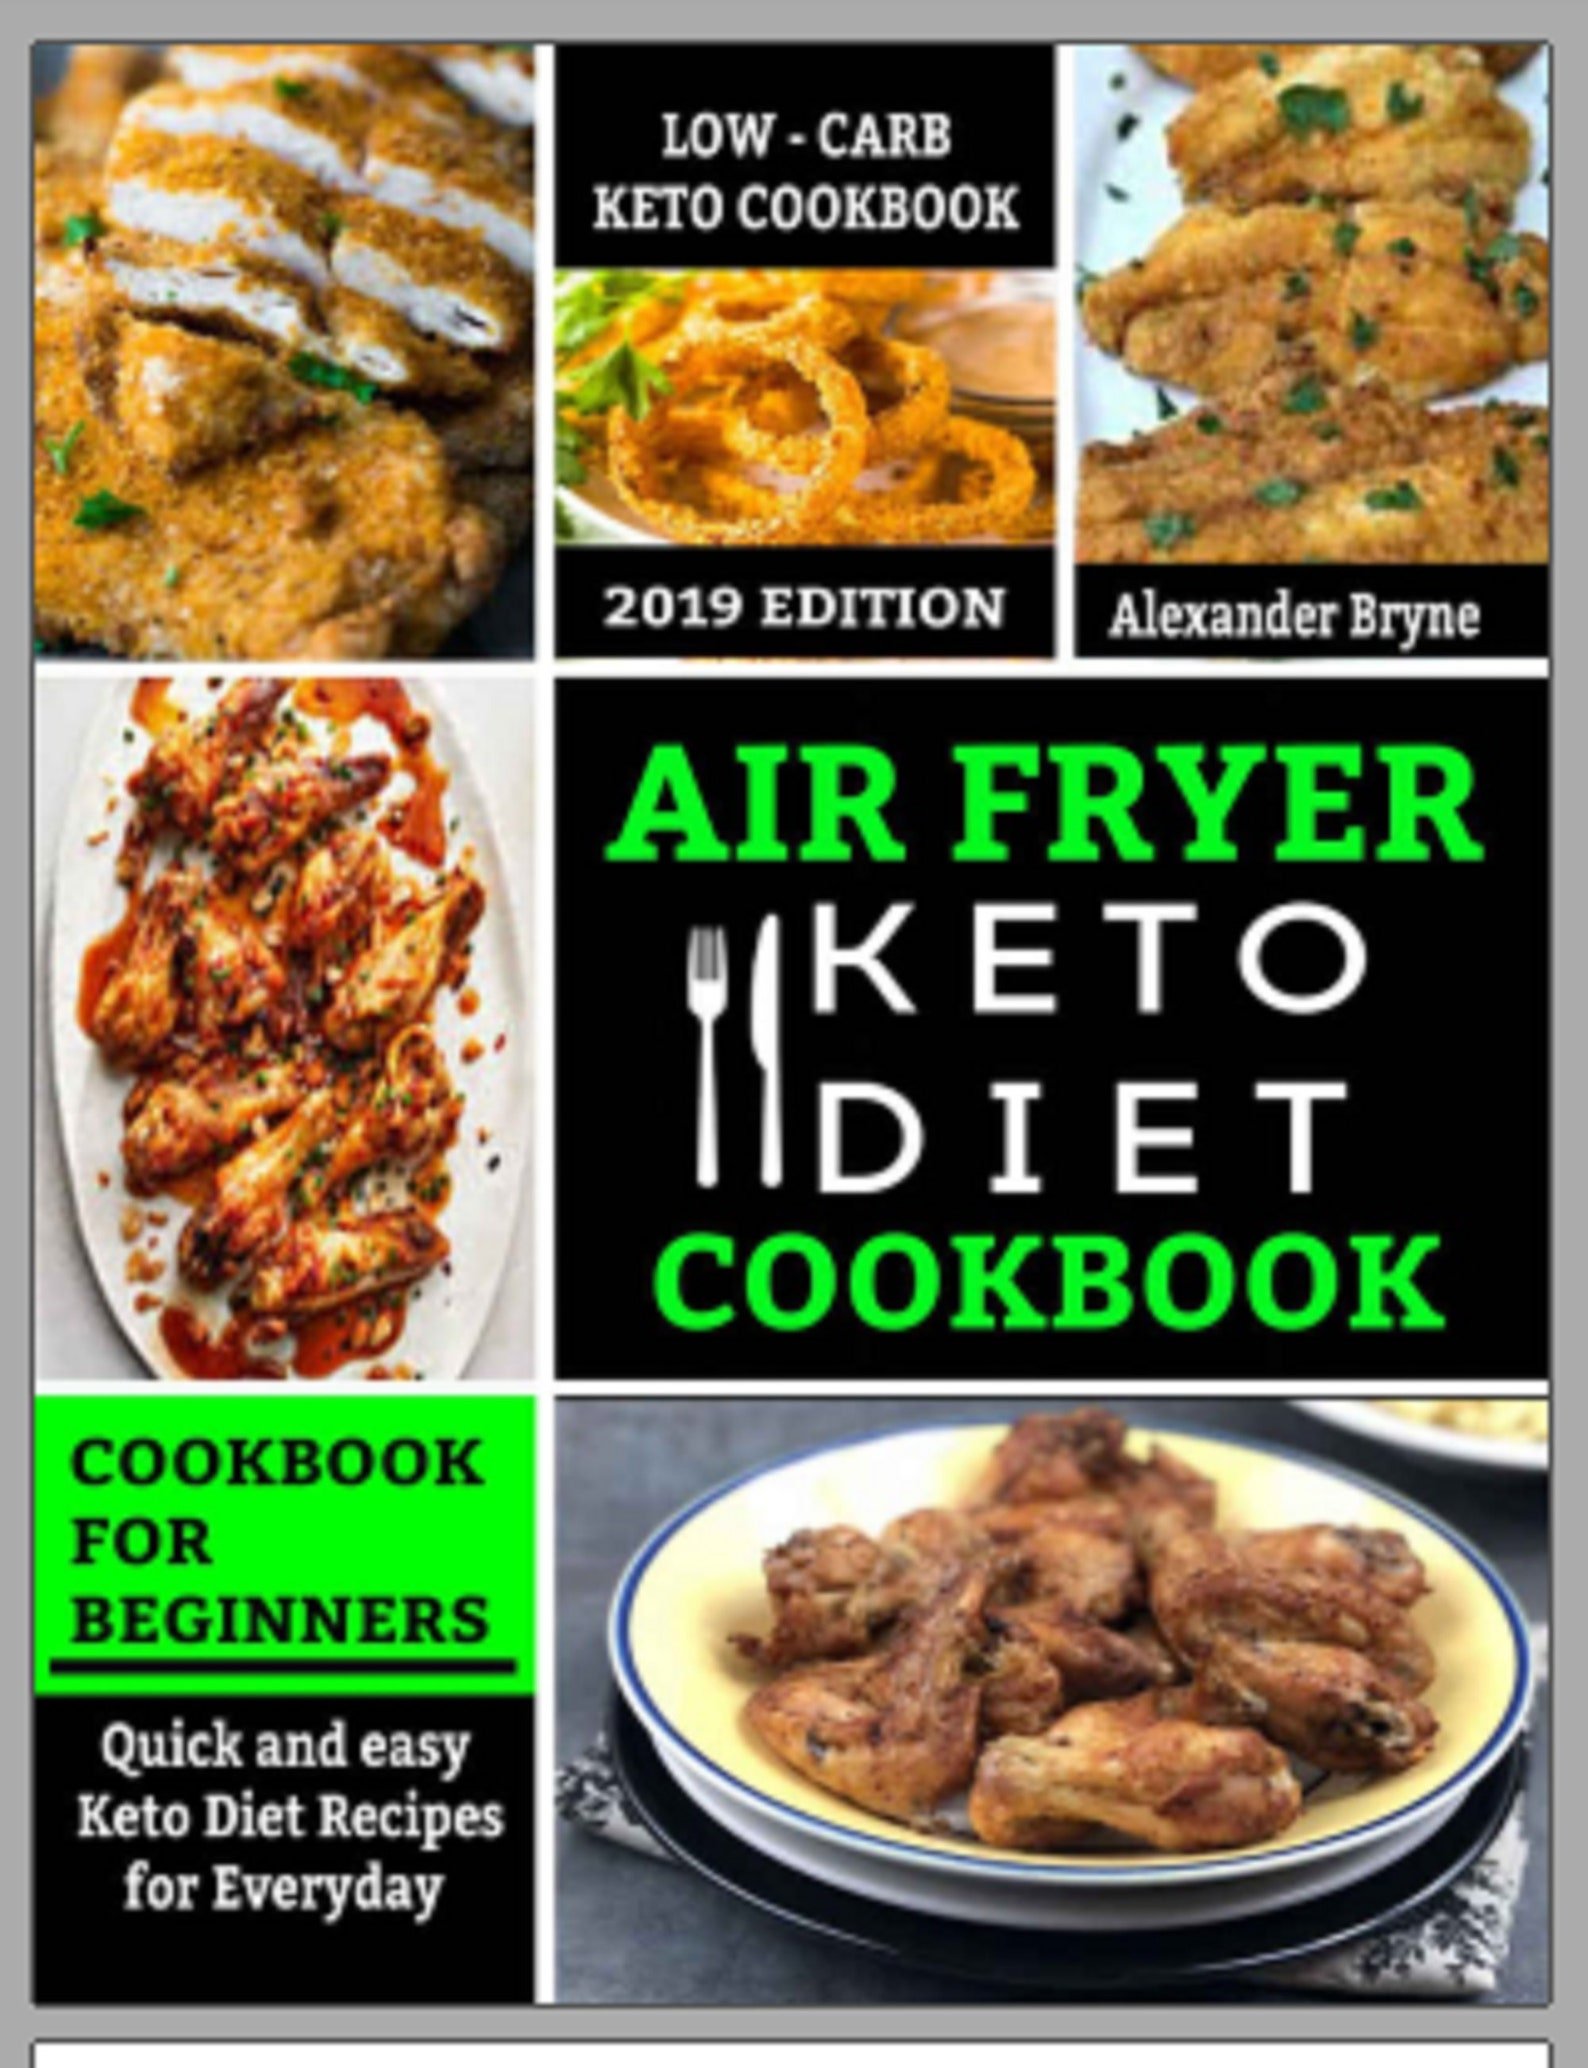 Air Fryer Keto Diet Cookbook Quick and Easy Keto Diet Recipes